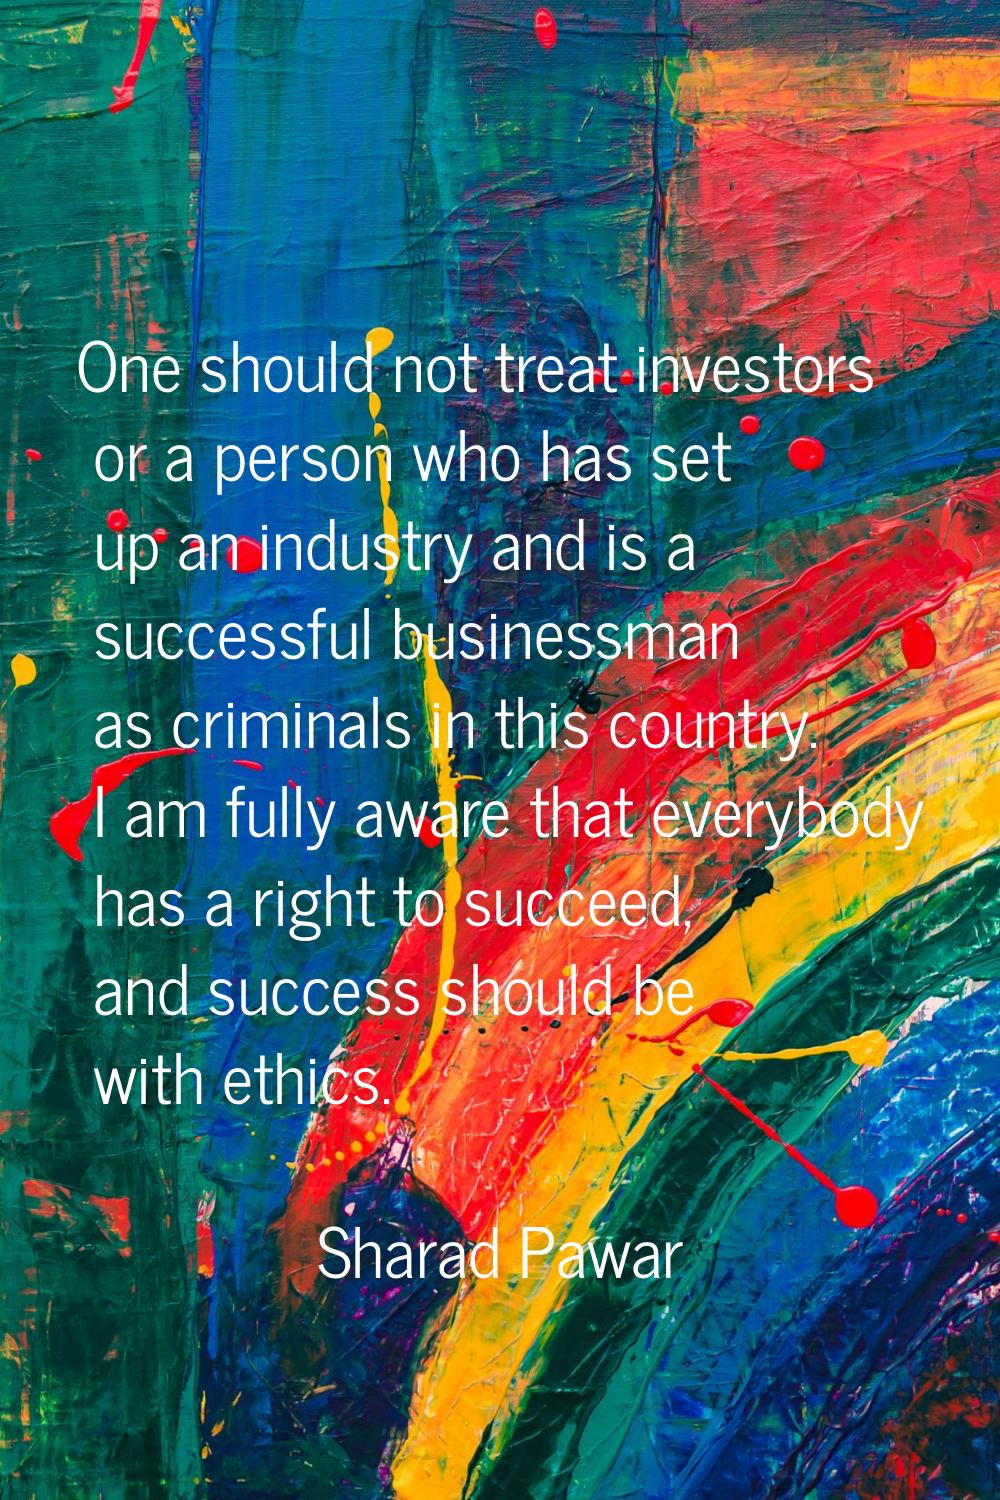 One should not treat investors or a person who has set up an industry and is a successful businessm